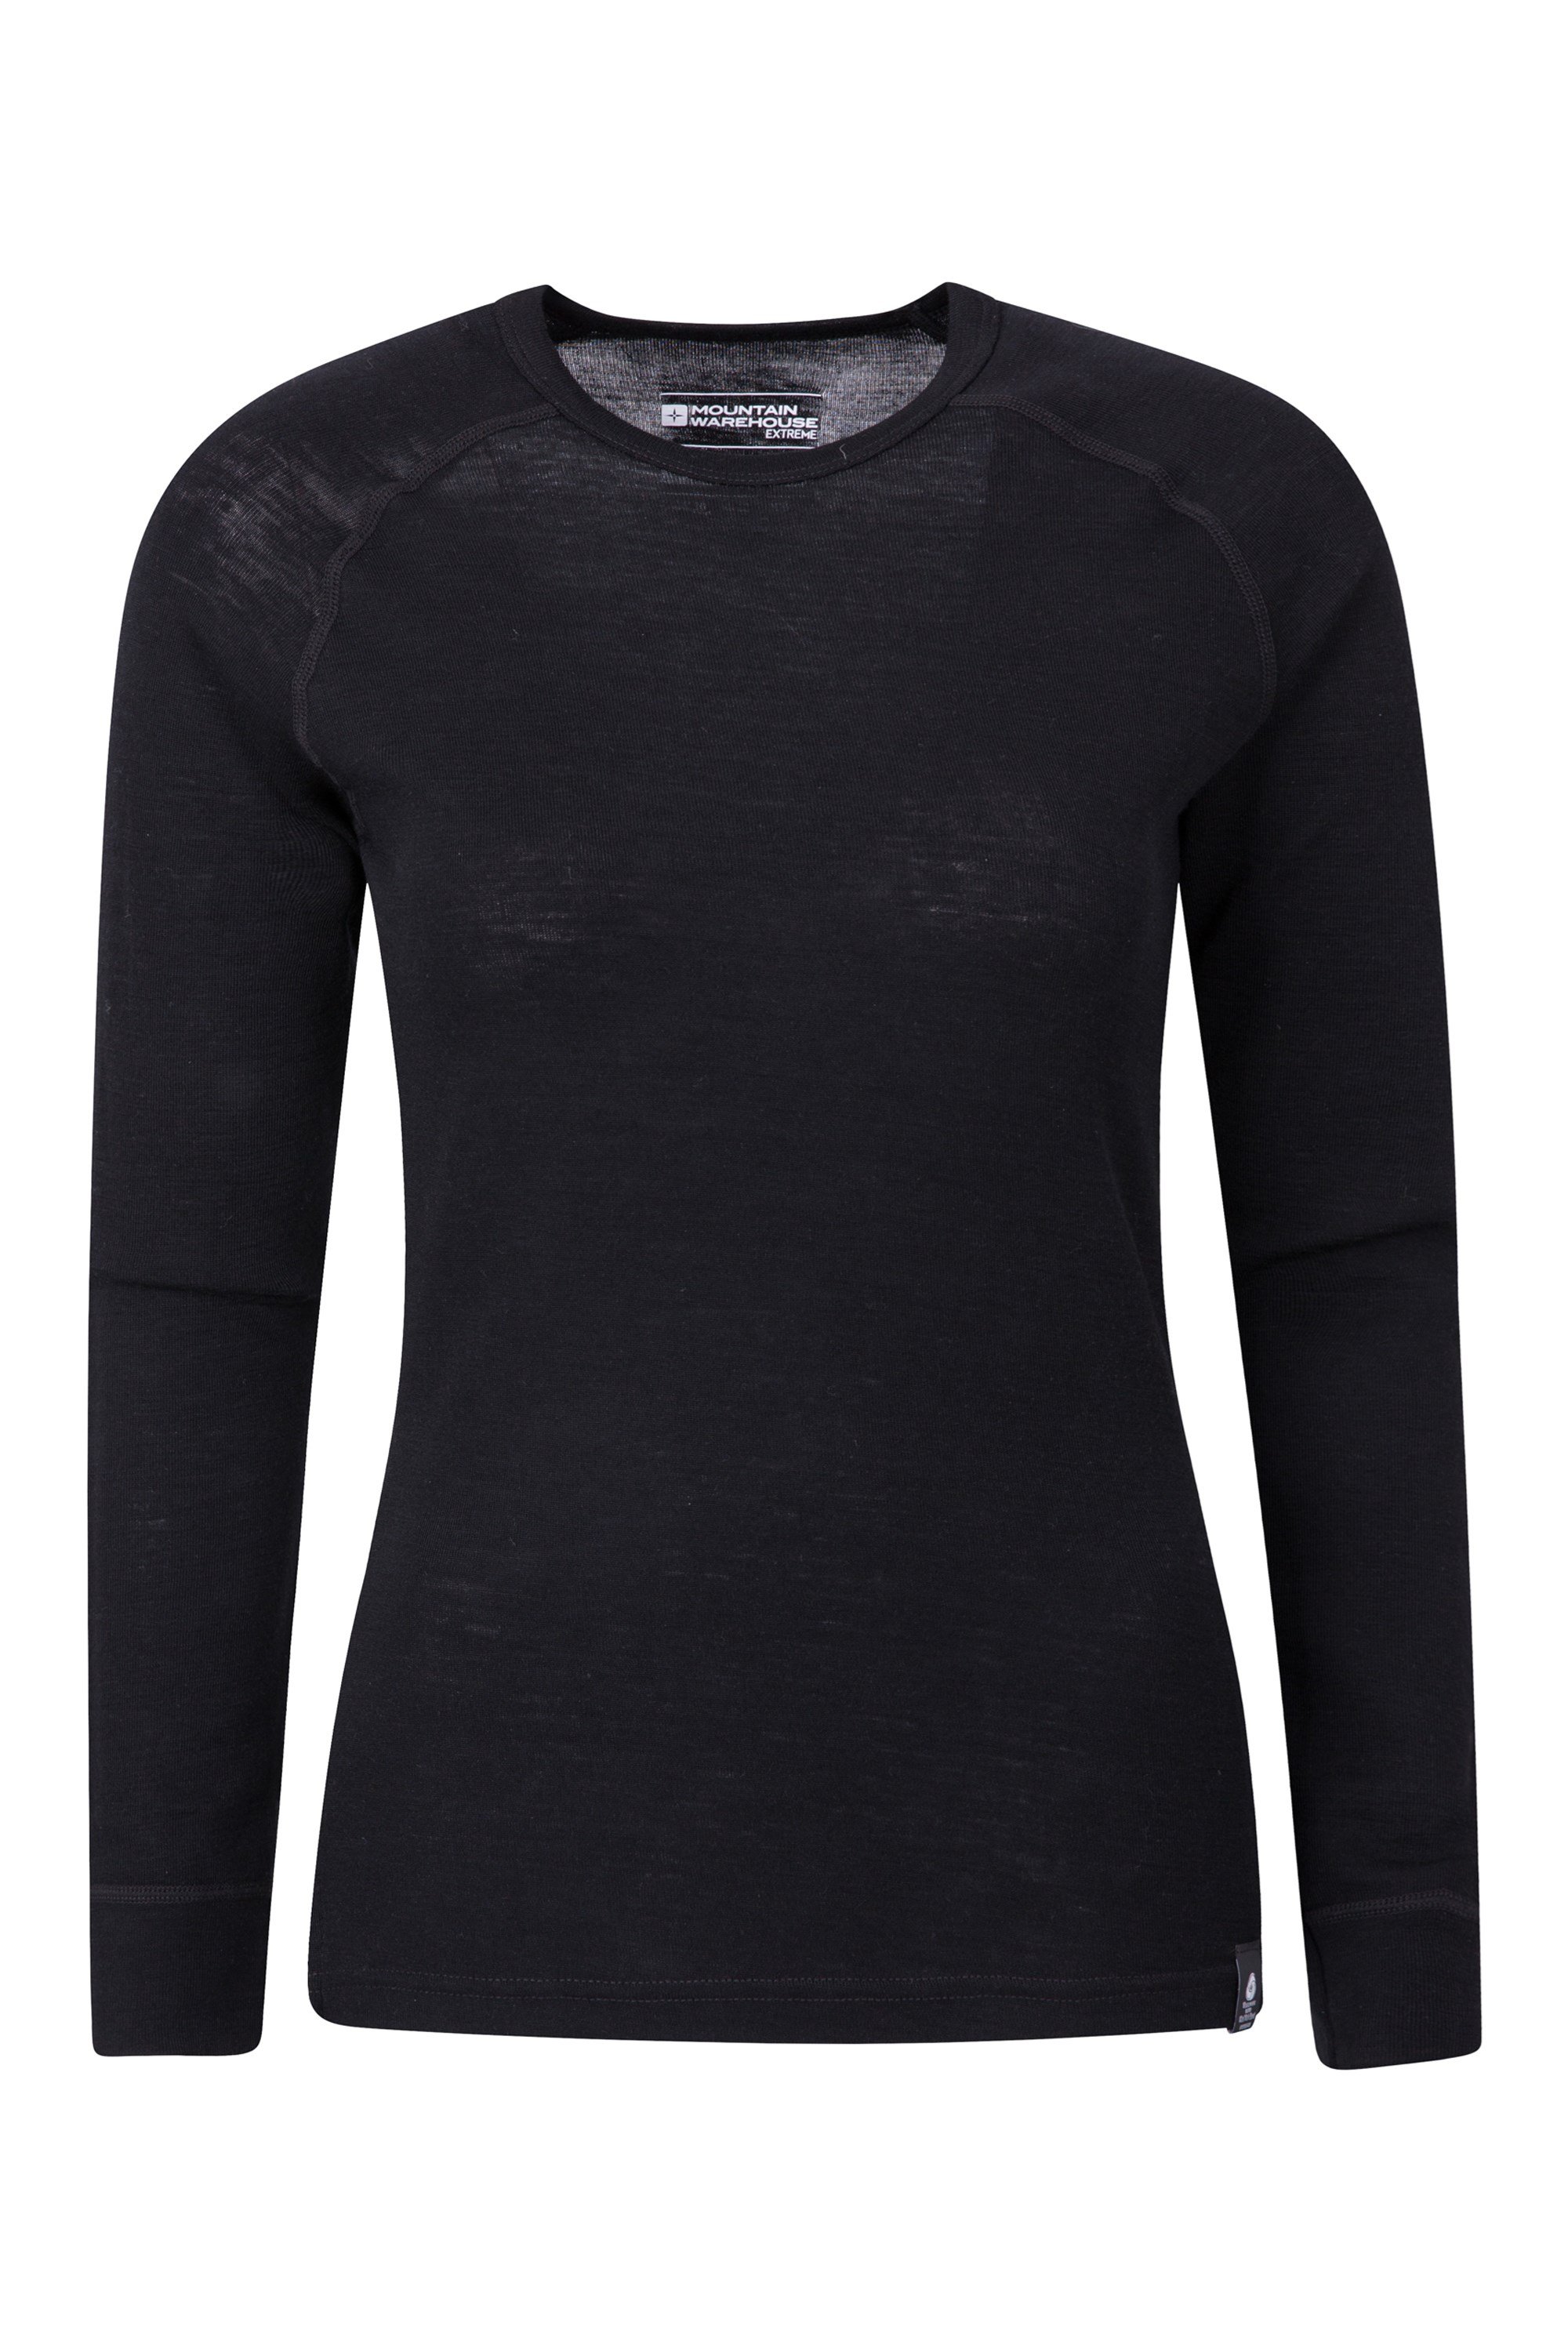 Lightweight Ladies Tee Shirt Thermal Underwear for Winter Mountain Warehouse Talus Womens Long Sleeves Baselayer Top Breathable Easy Care 